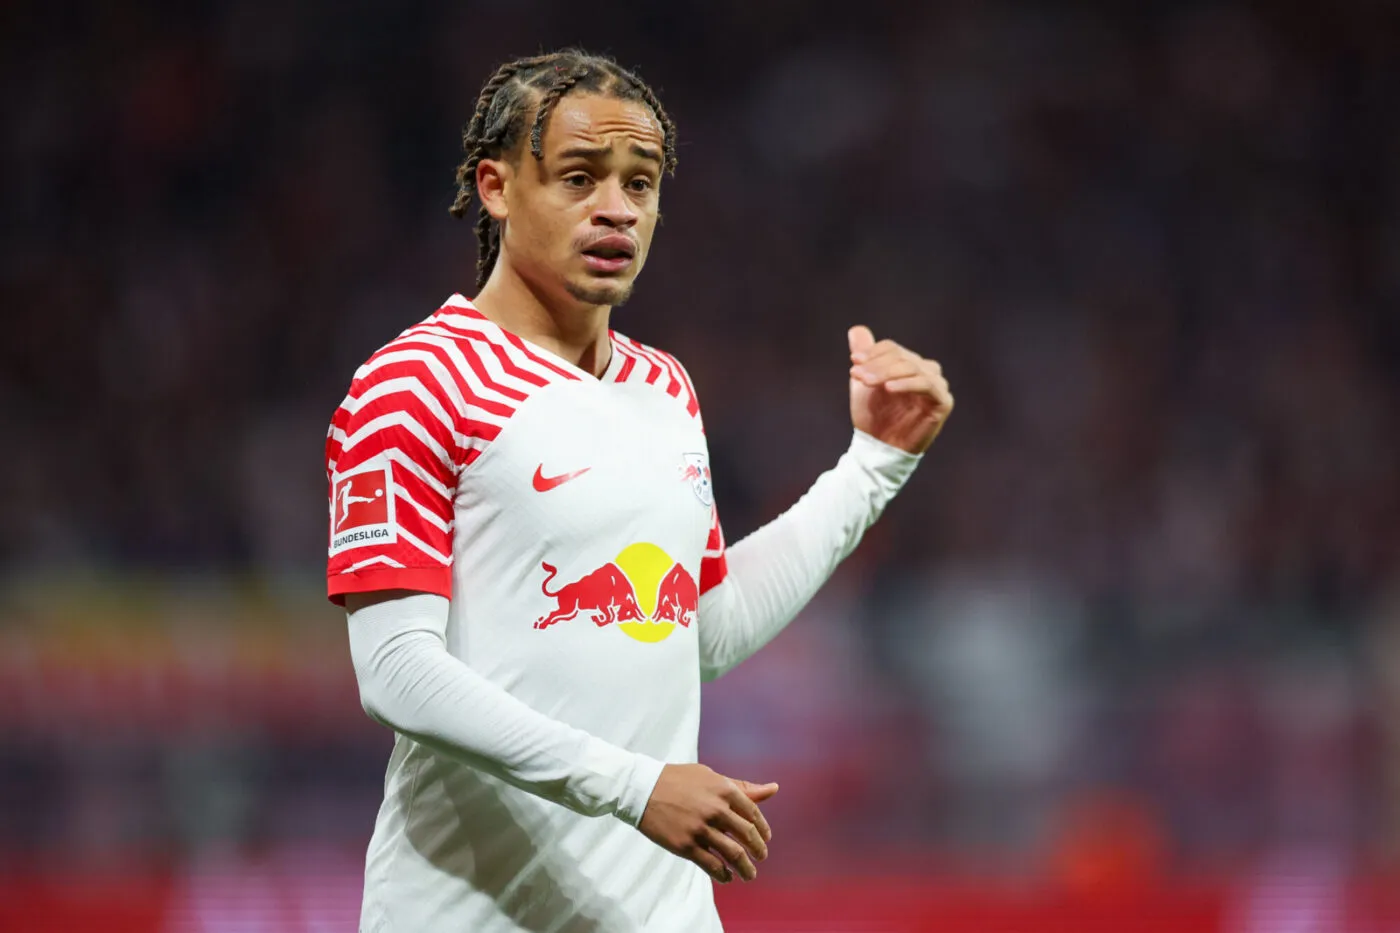 28 October 2023, Saxony, Leipzig: Soccer: Bundesliga, Matchday 9, RB Leipzig - 1. FC Kln at the Red Bull Arena. Leipzig's Xavi Simons gestures. Photo: Jan Woitas/dpa - IMPORTANT NOTE: In accordance with the requirements of the DFL Deutsche Fuball Liga and the DFB Deutscher Fuball-Bund, it is prohibited to use or have used photographs taken in the stadium and/or of the match in the form of sequence pictures and/or video-like photo series. - Photo by Icon sport